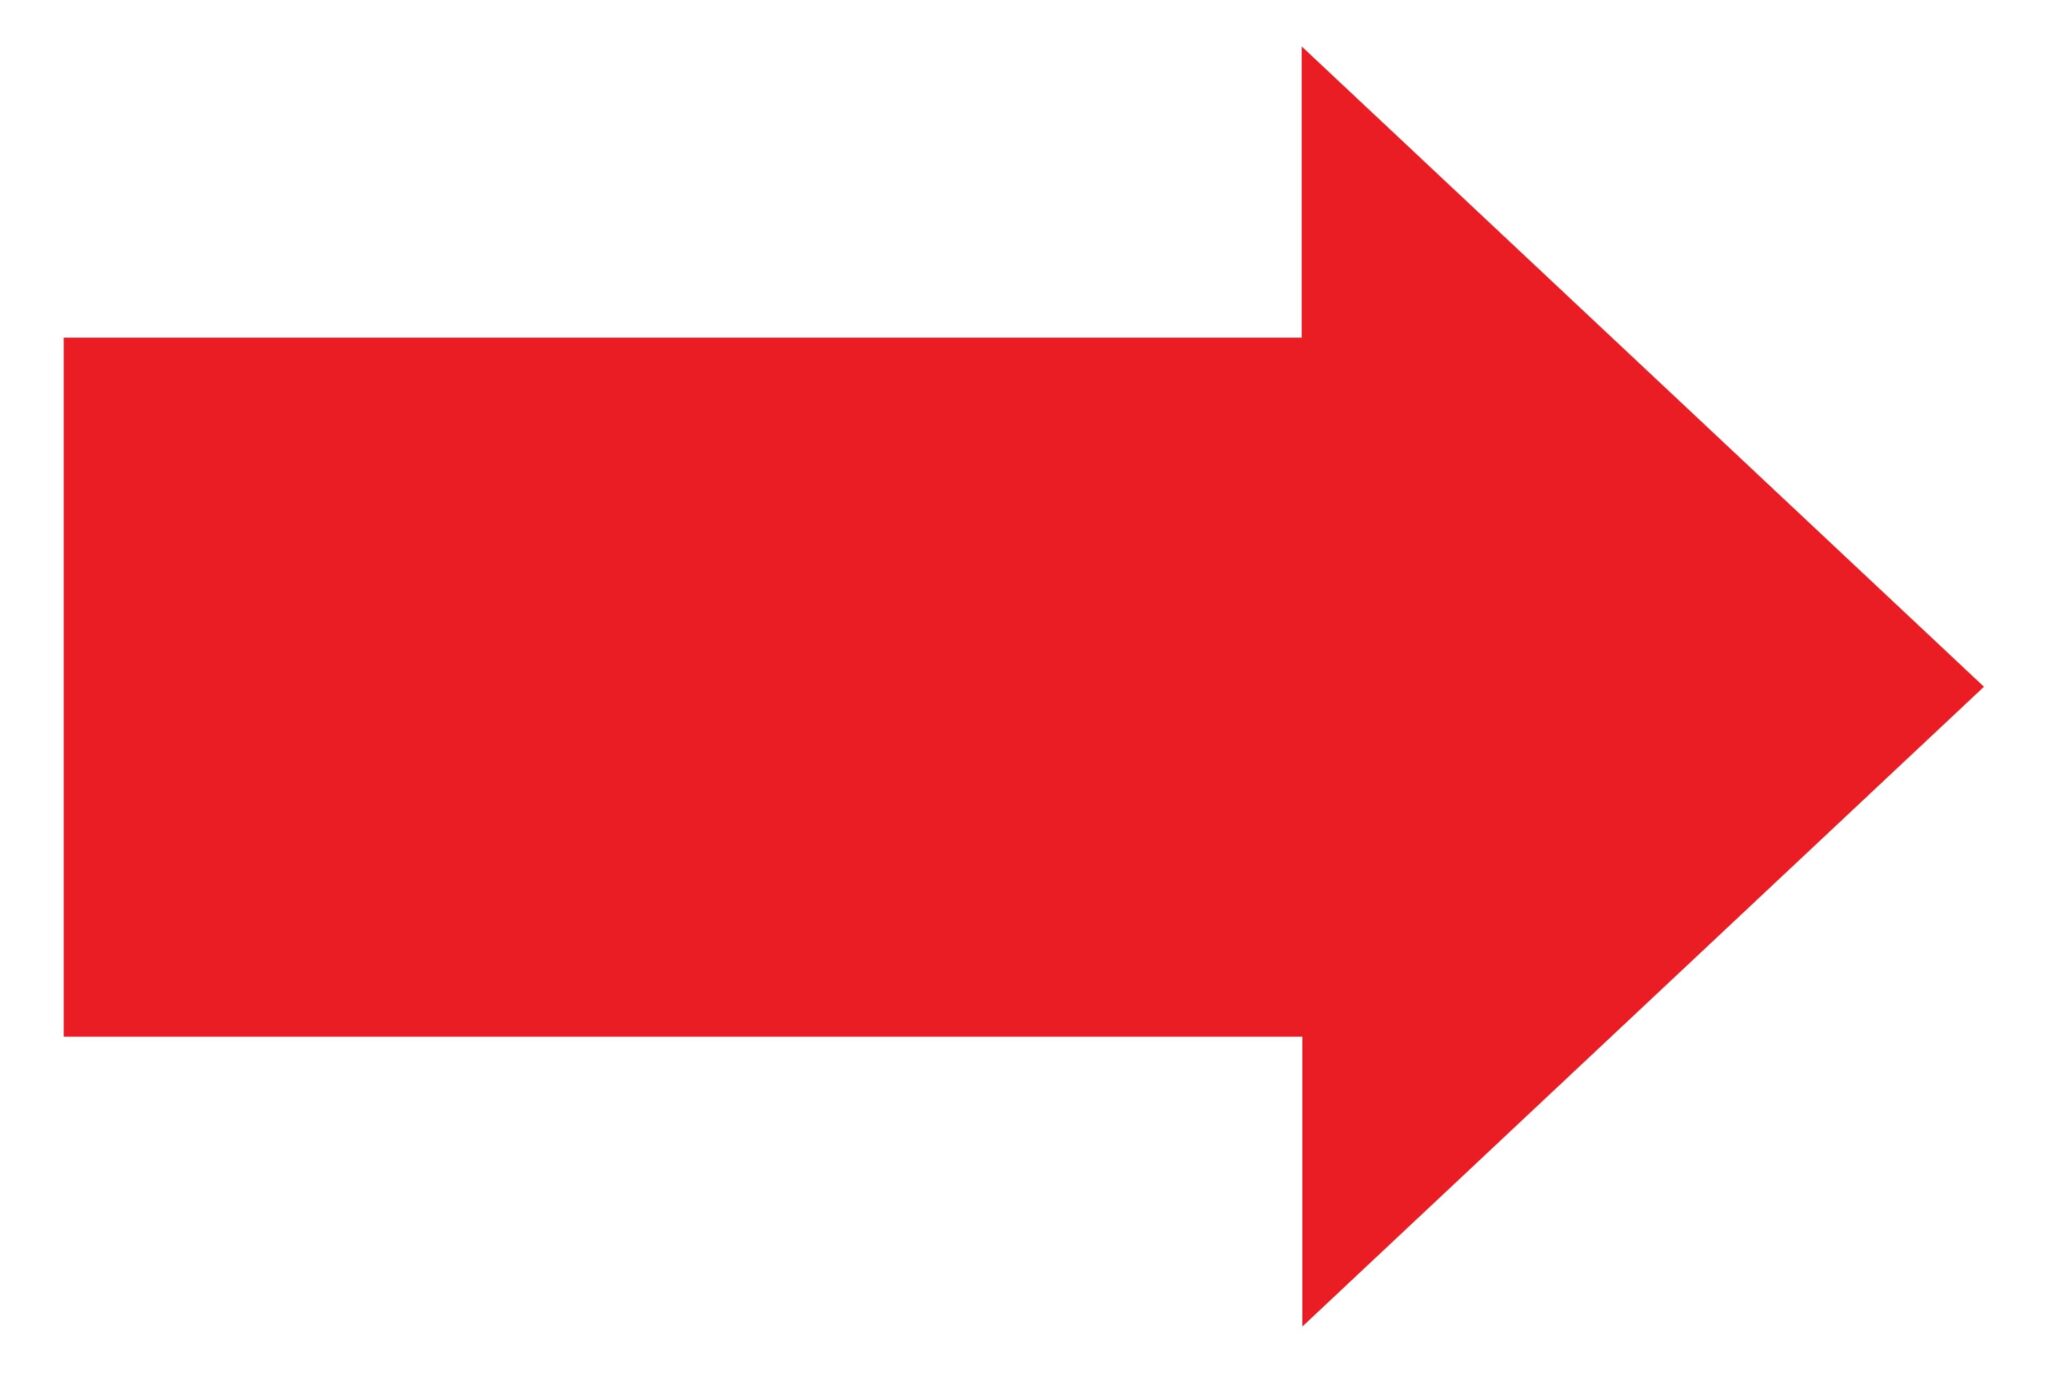 Directional Arrows Meaning